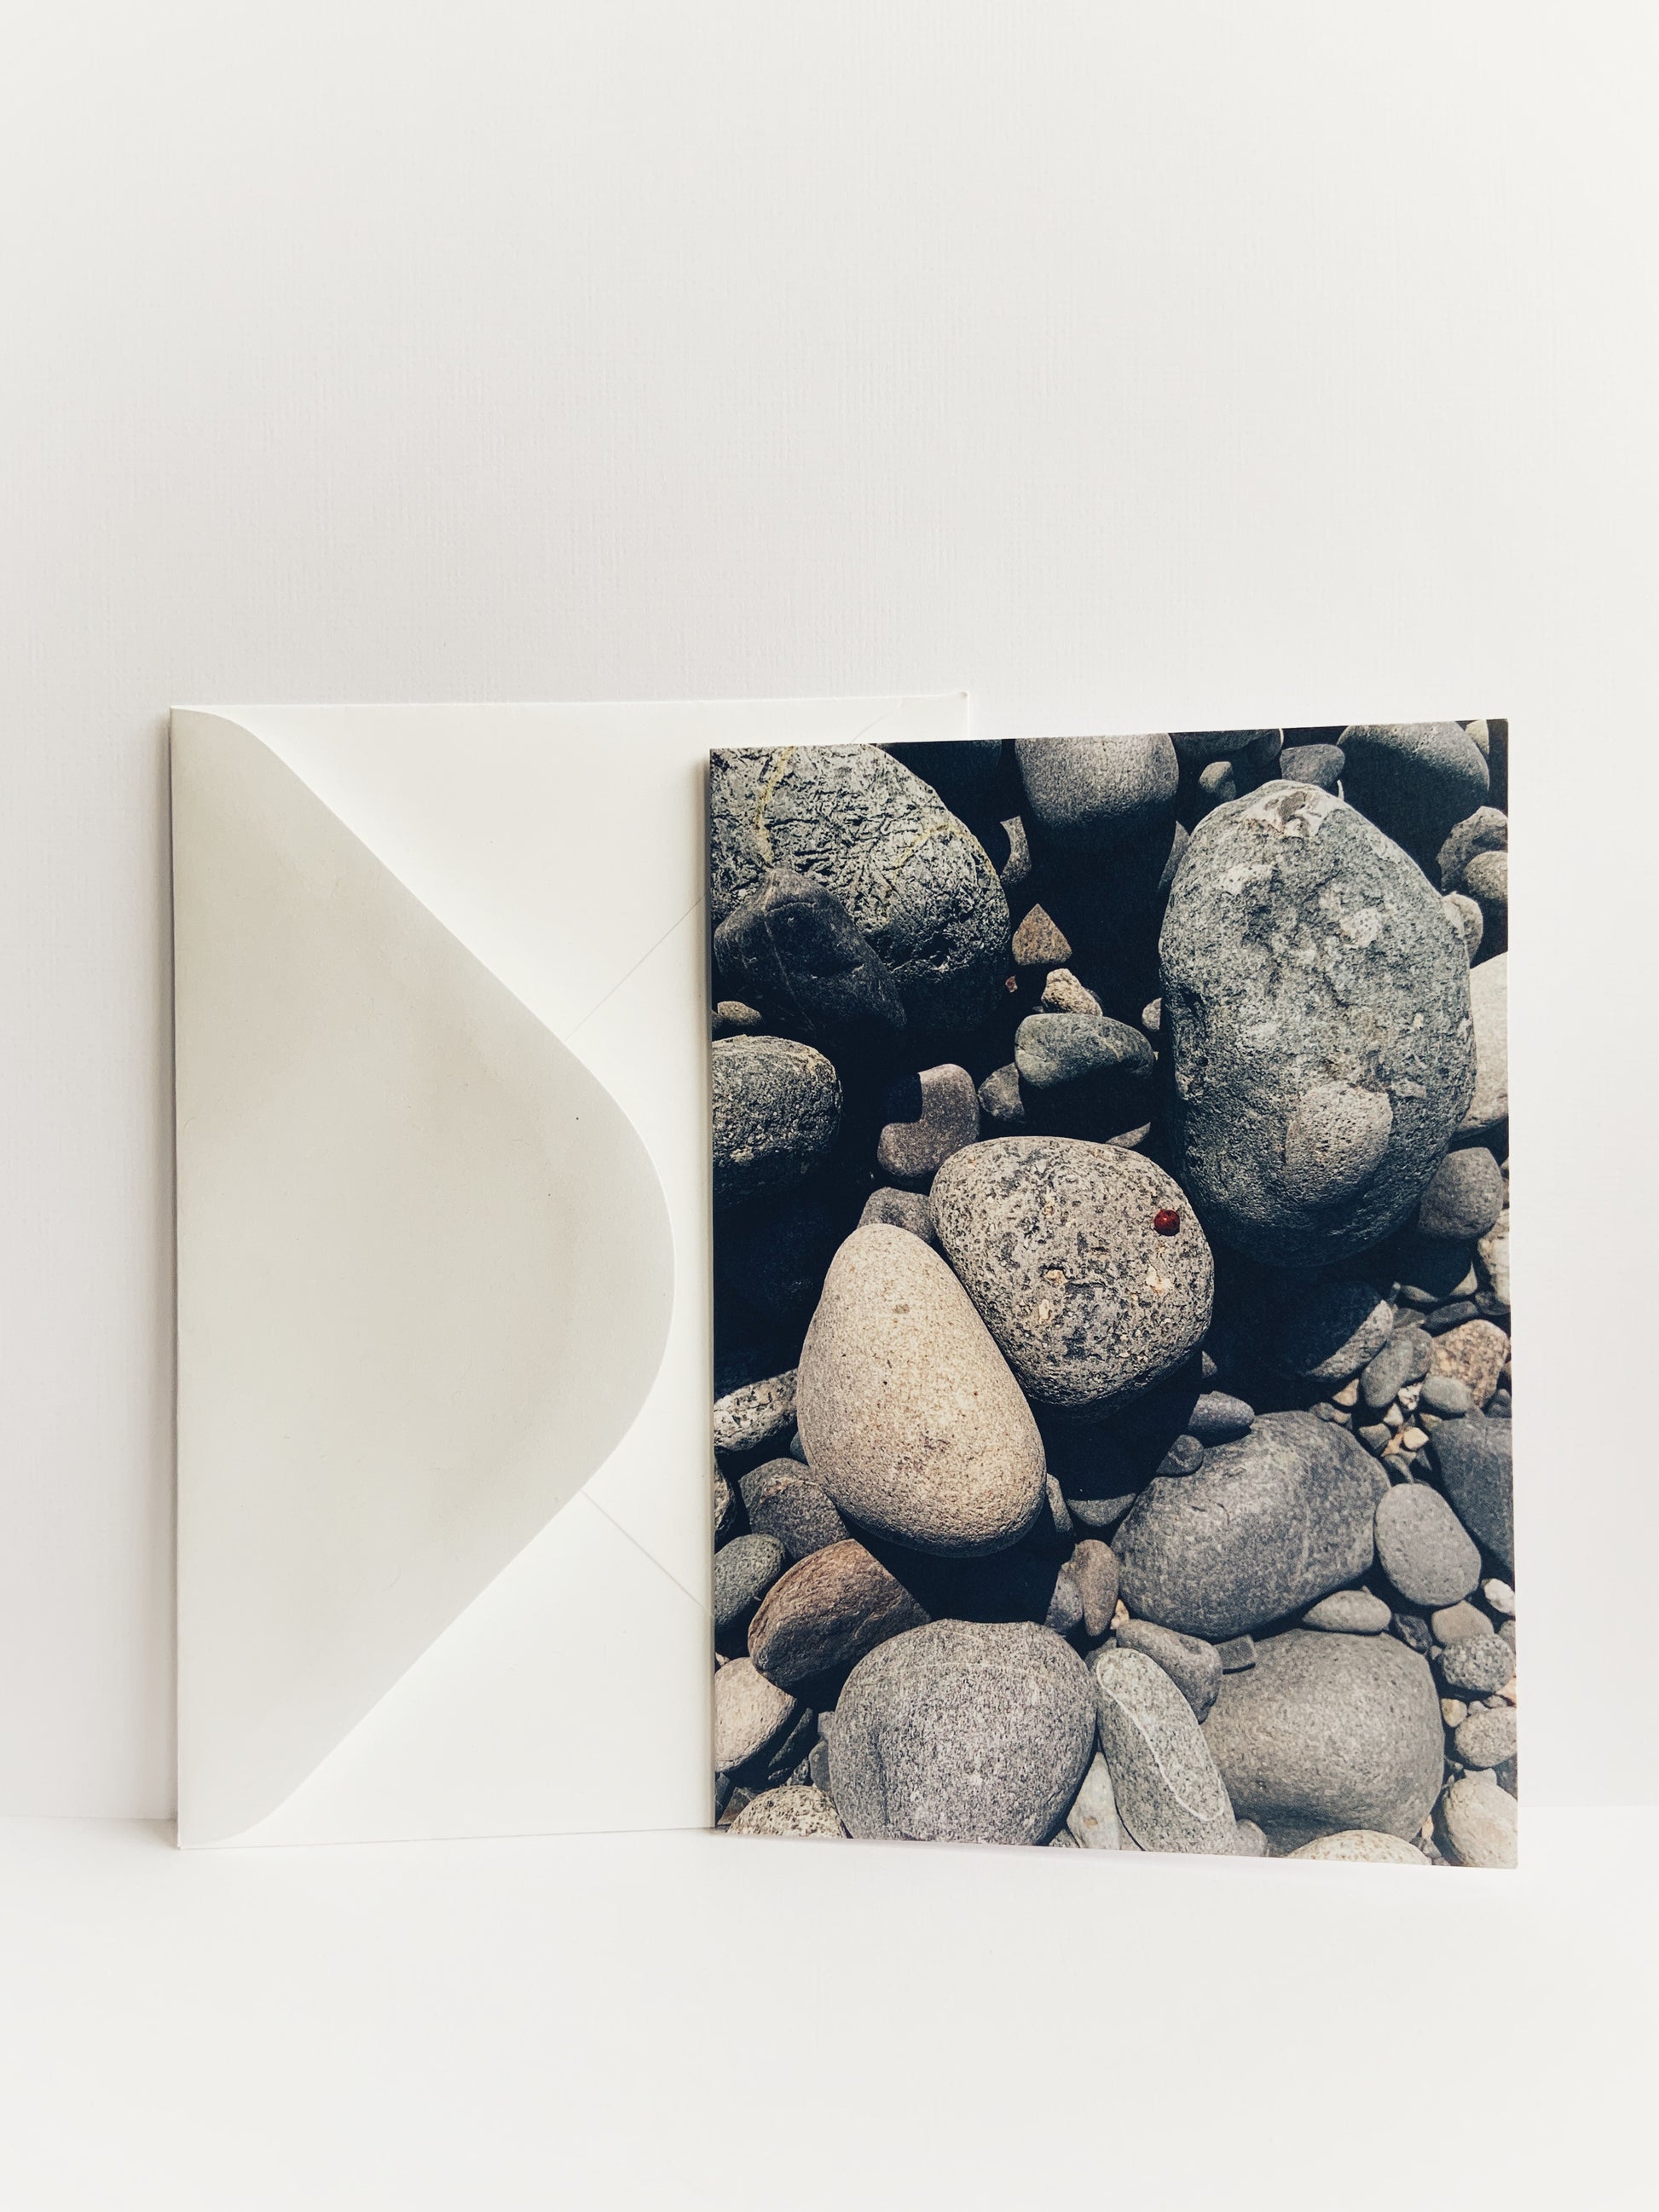 Greeting card with an image of a ladybug in the middle of an assortment of beach rocks